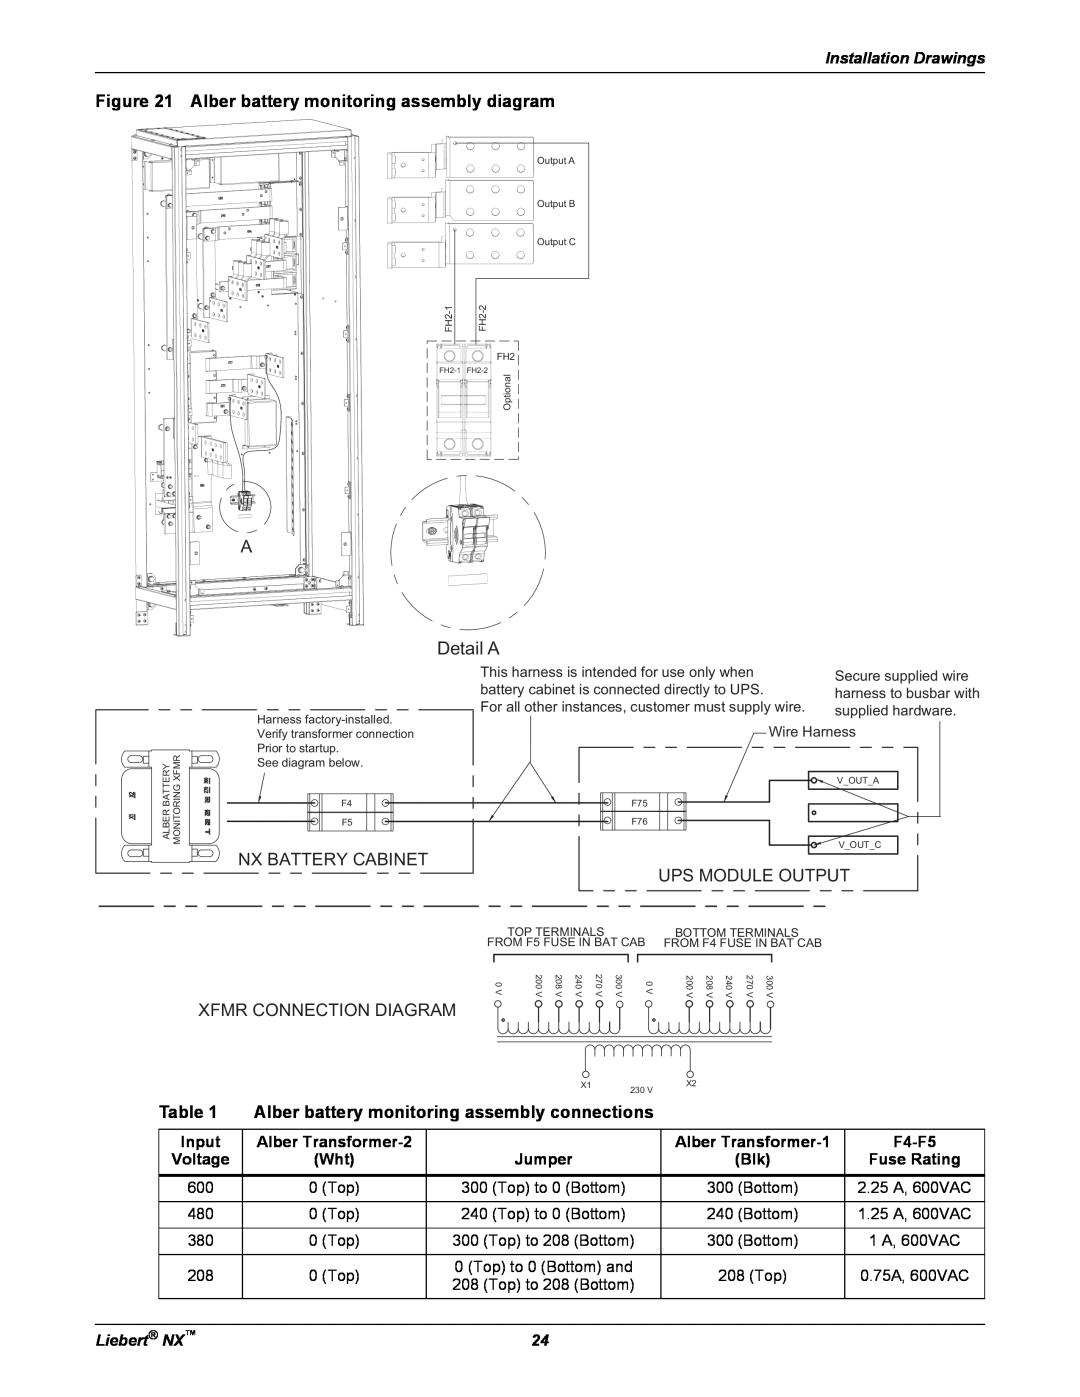 Emerson 225-600KVA Detail A, Alber battery monitoring assembly diagram, Alber battery monitoring assembly connections 